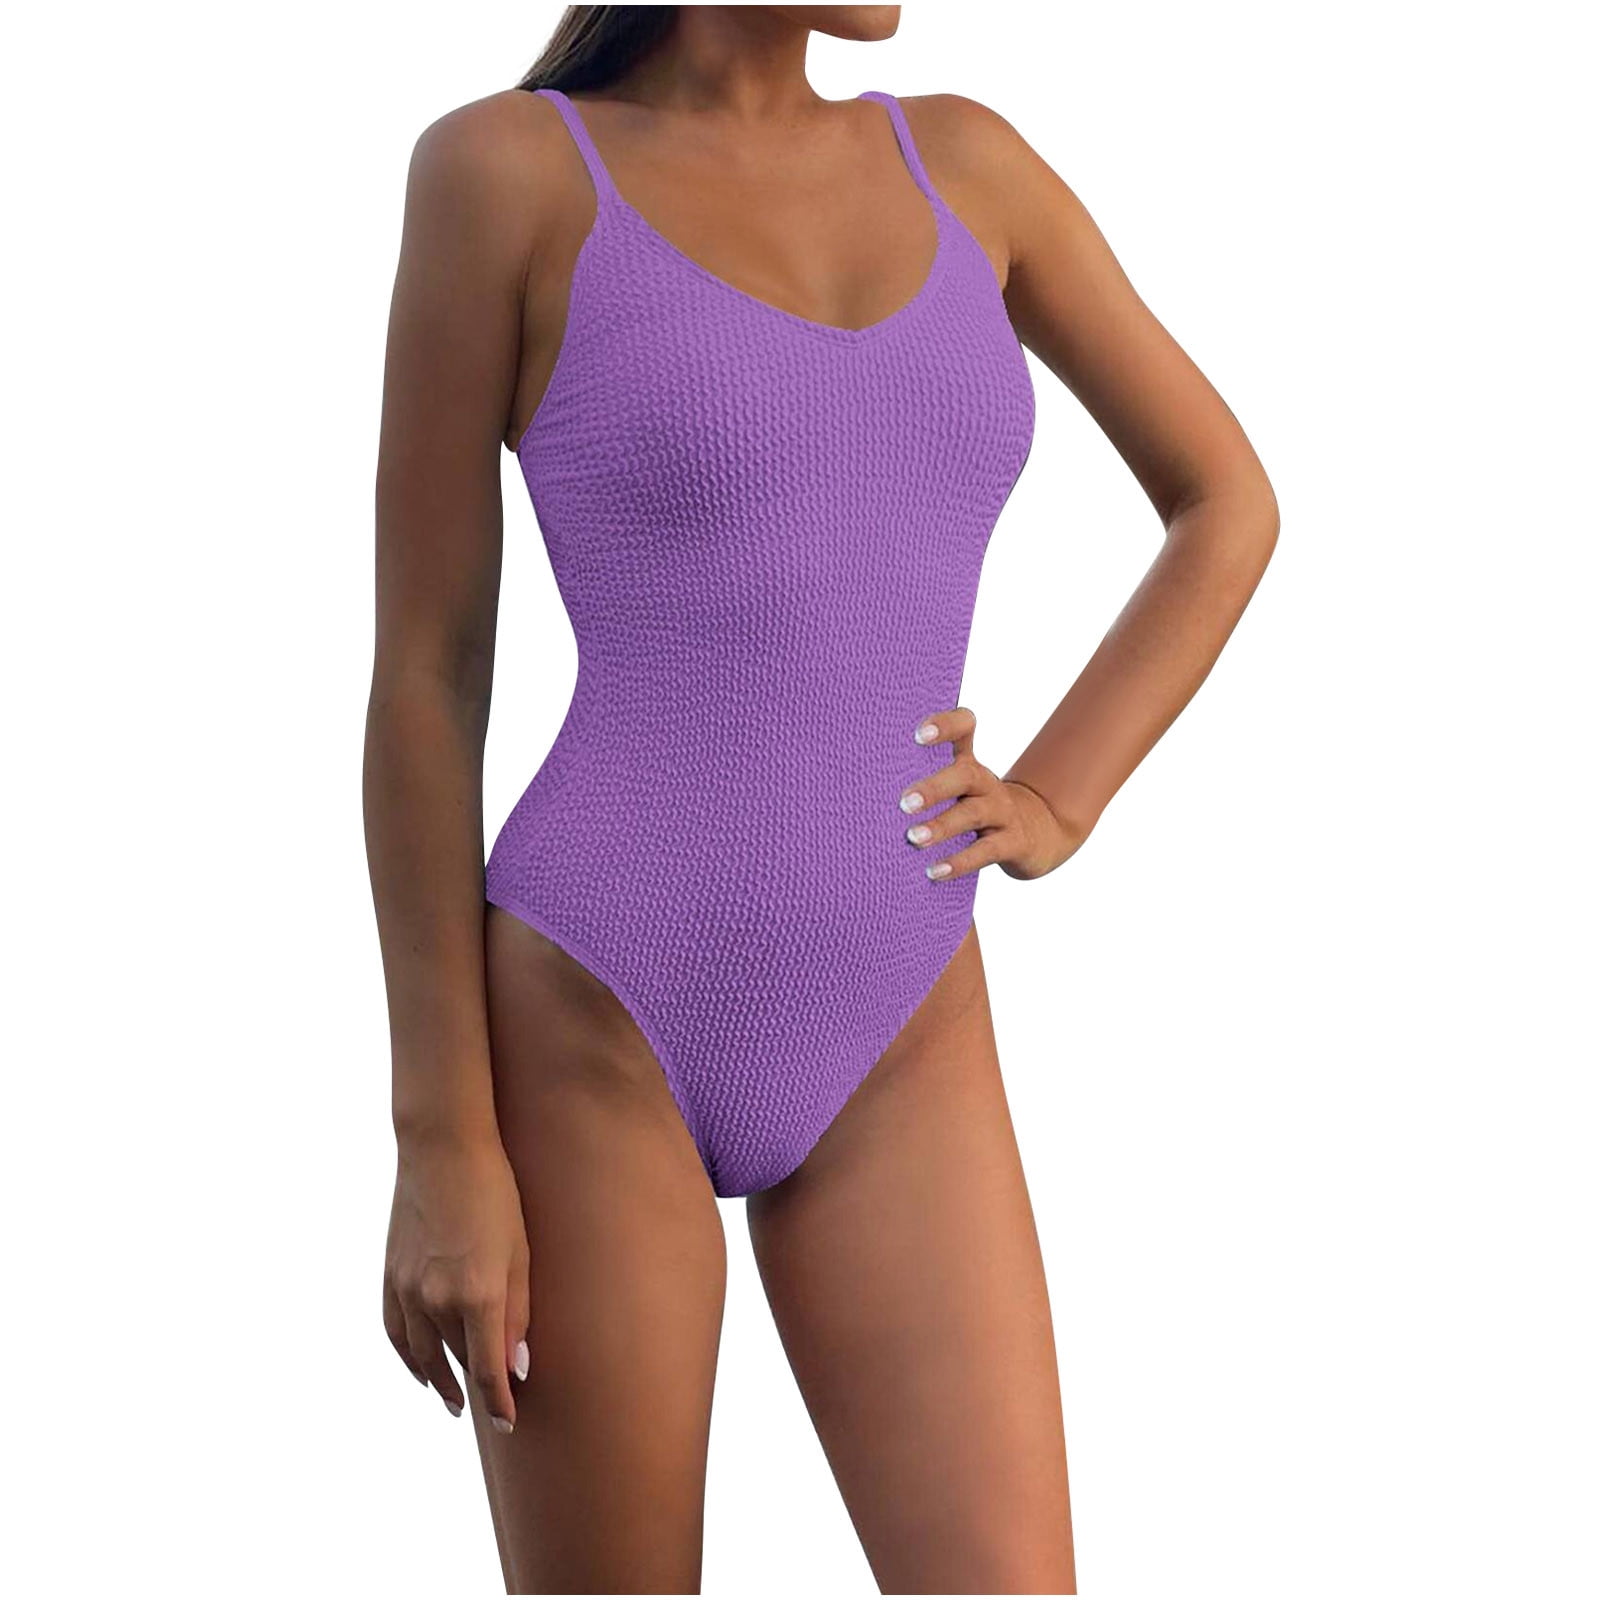 Jikolililili Women's 23 New Fashion Style With Bra Pad, No Steel Support,  Multi-color New Fashion One-piece Swimsuit, Sexy Solid Color Swimsuit, One- piece Sexy Swim 2023 Plus Size Swimsuit 